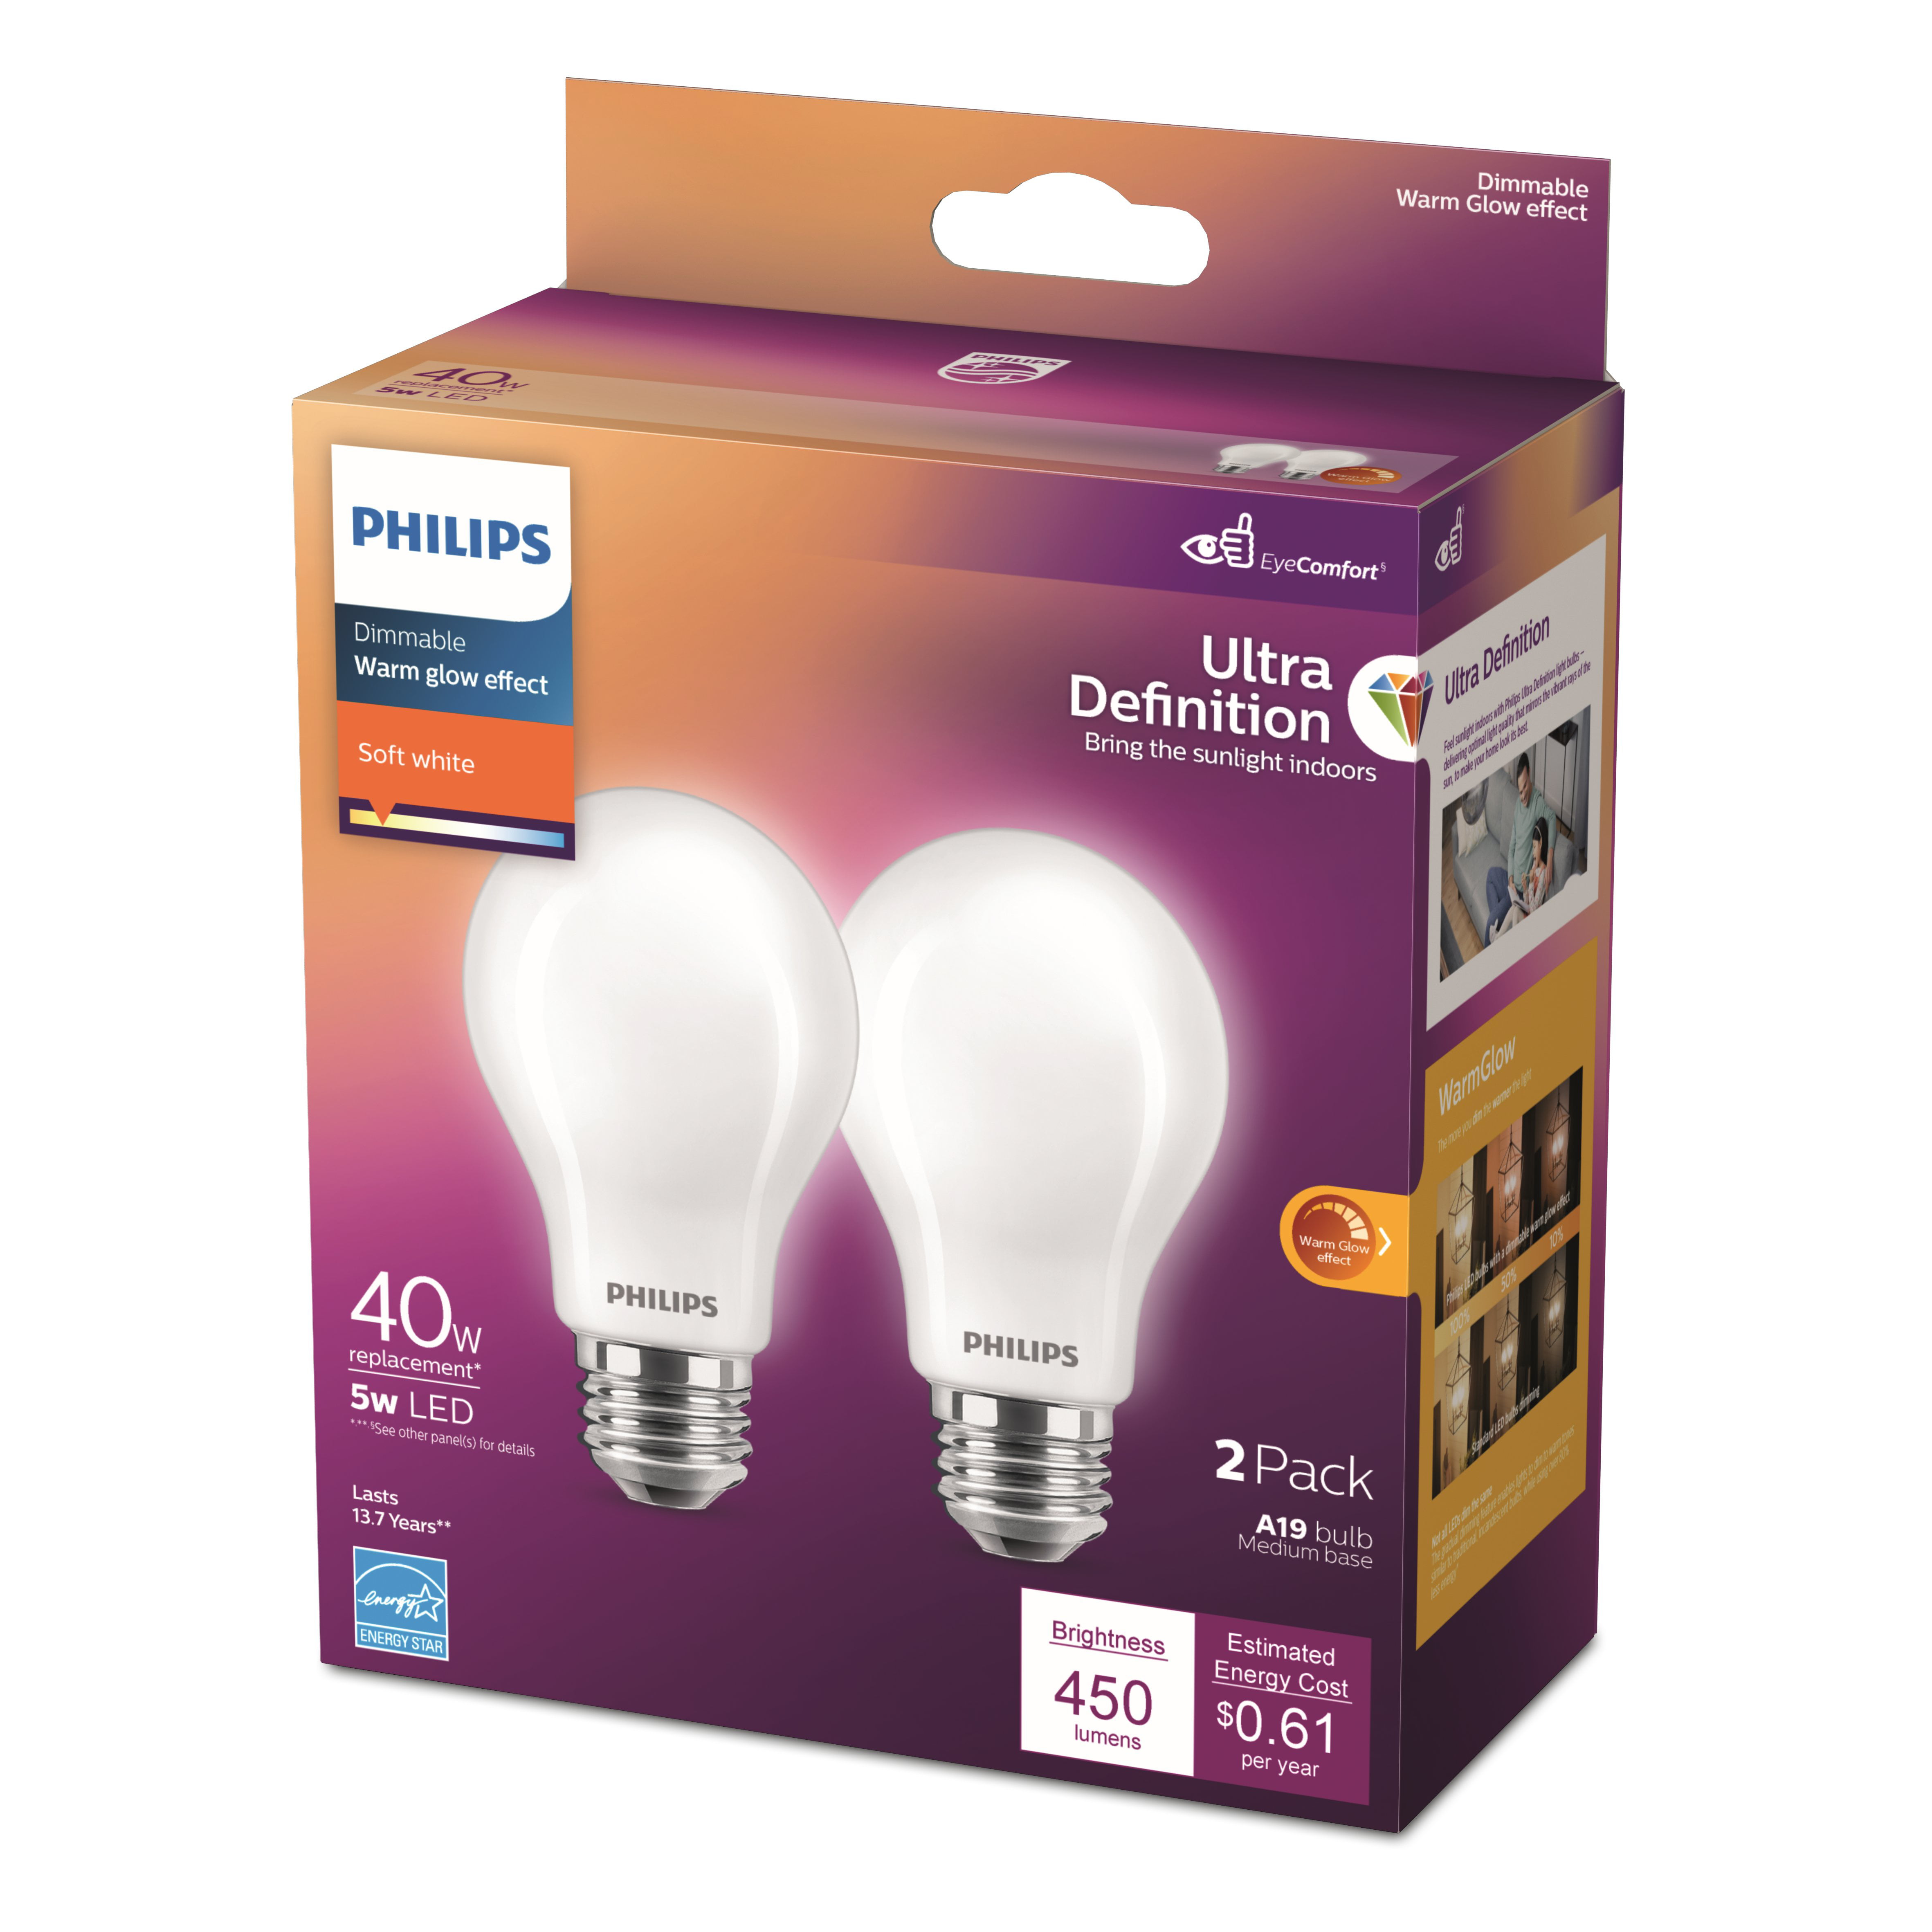 Infectious disease Miss motif Philips Ultra Definition LED 40-Watt A19 Light Bulb, Frosted Soft White,  Dimmable, E26 Medium Base (2-Pack) - Walmart.com